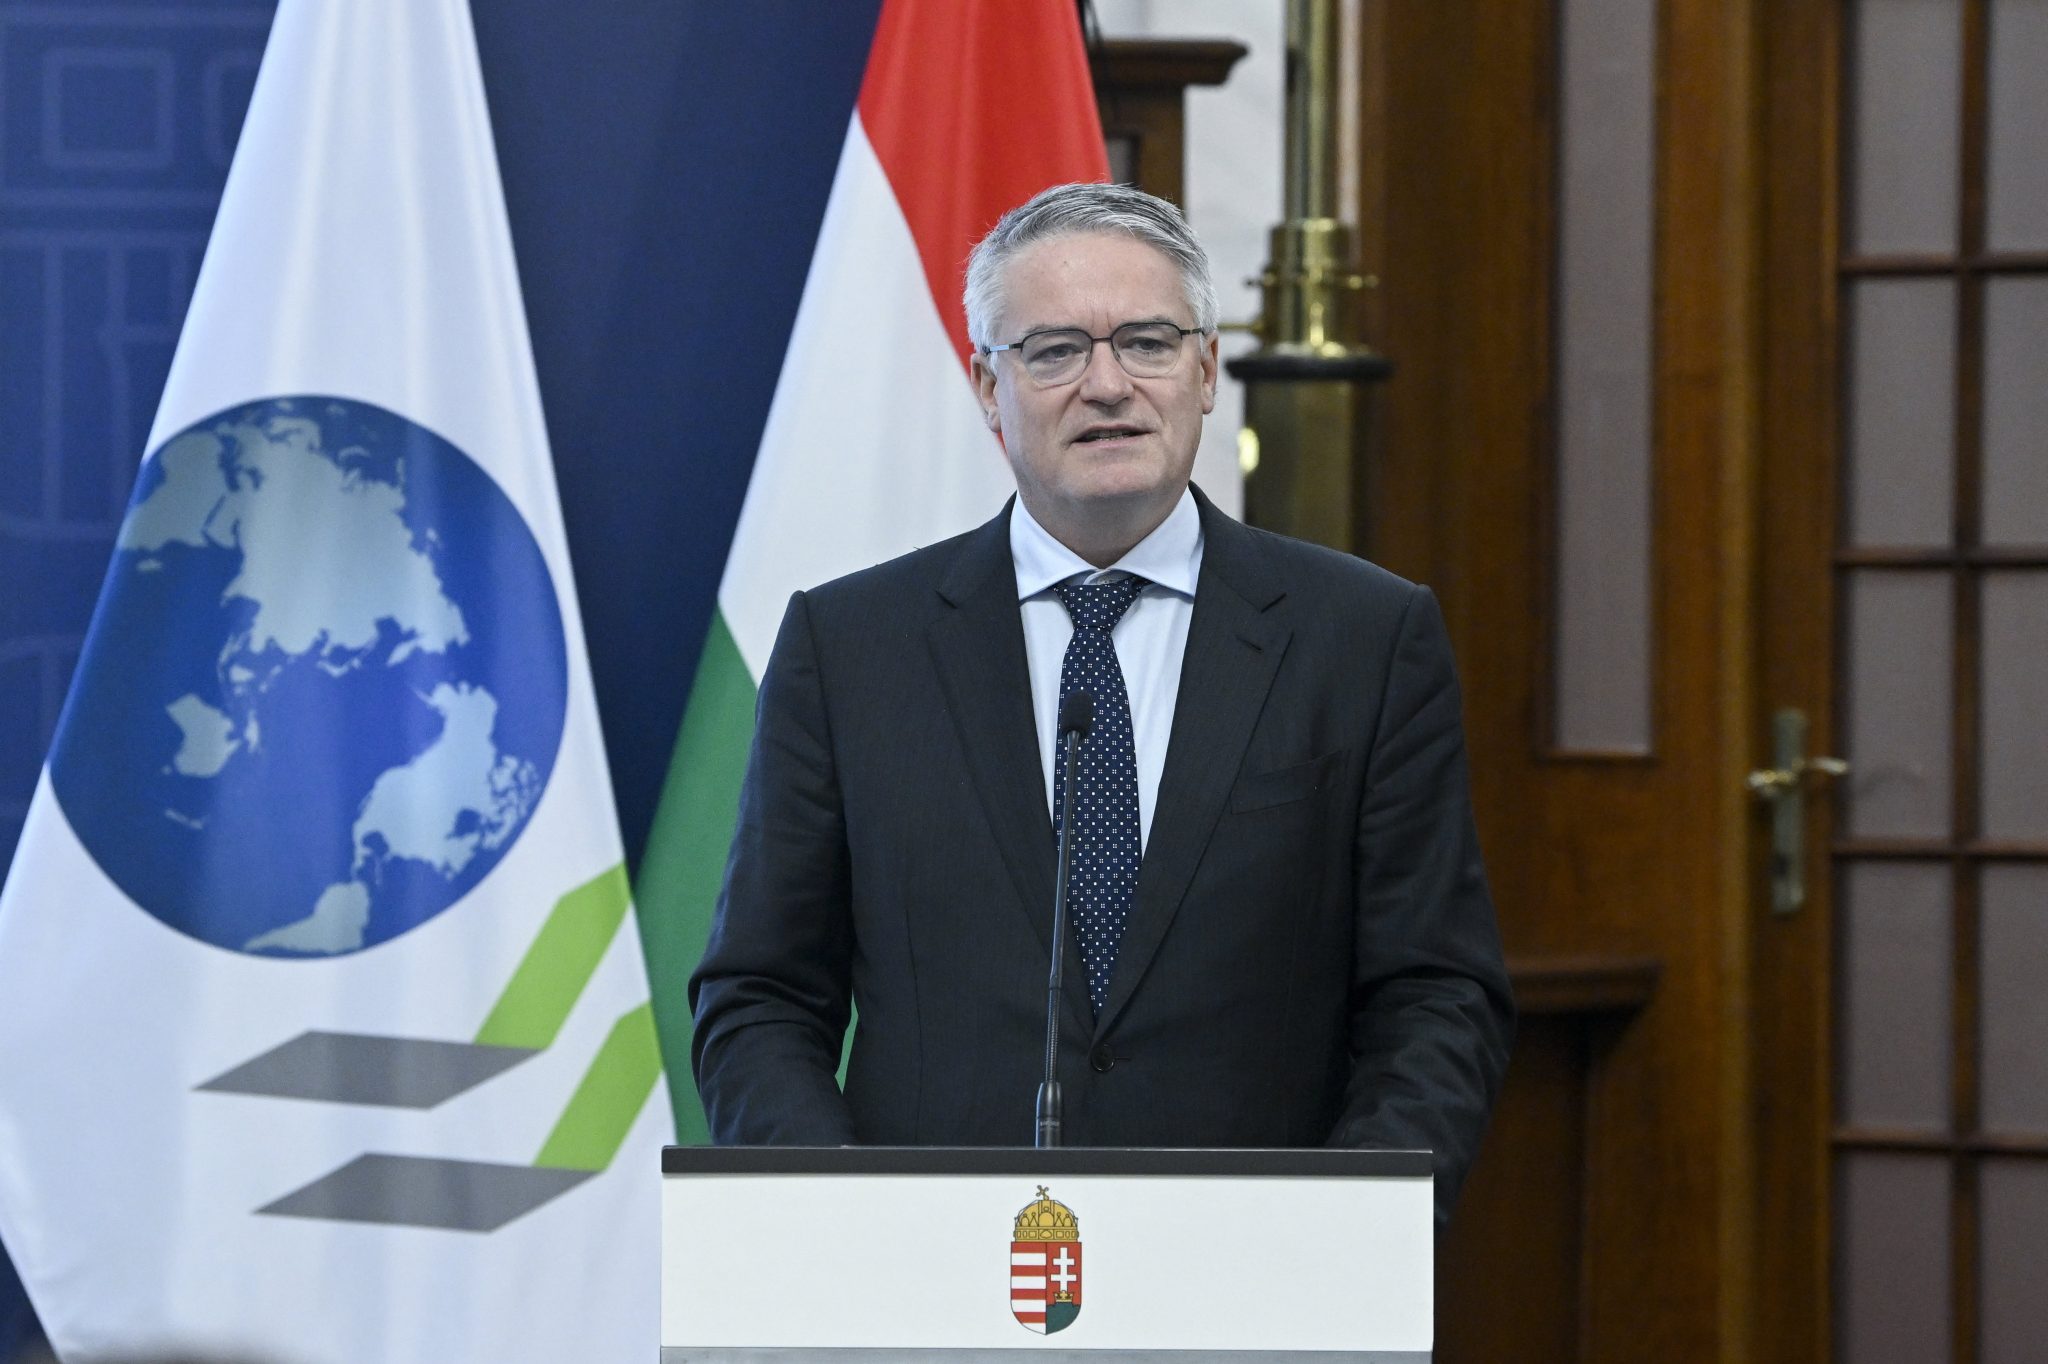 OECD Report Confirms Hungary's Sustainable Growth Prospects